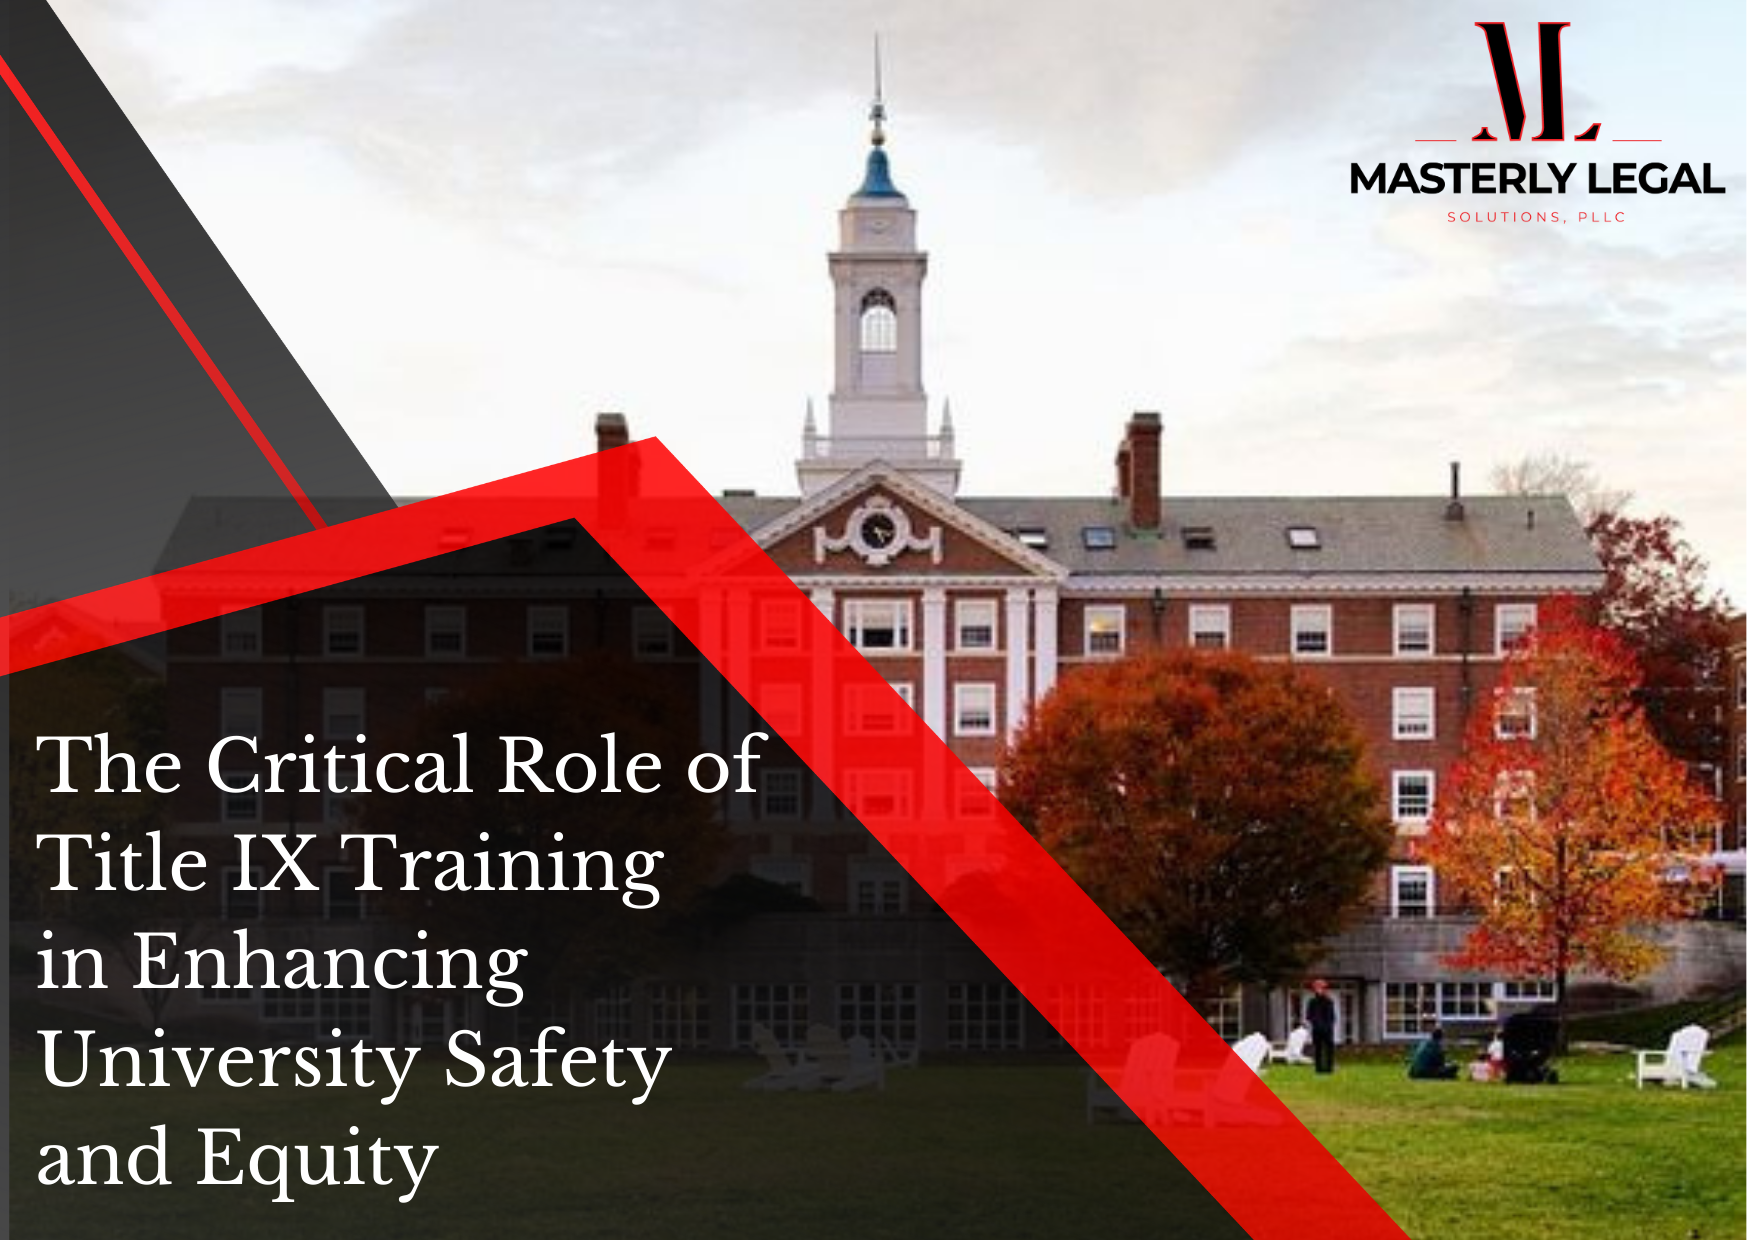 The Critical Role of Title IX Training in Enhancing University Safety and Equity